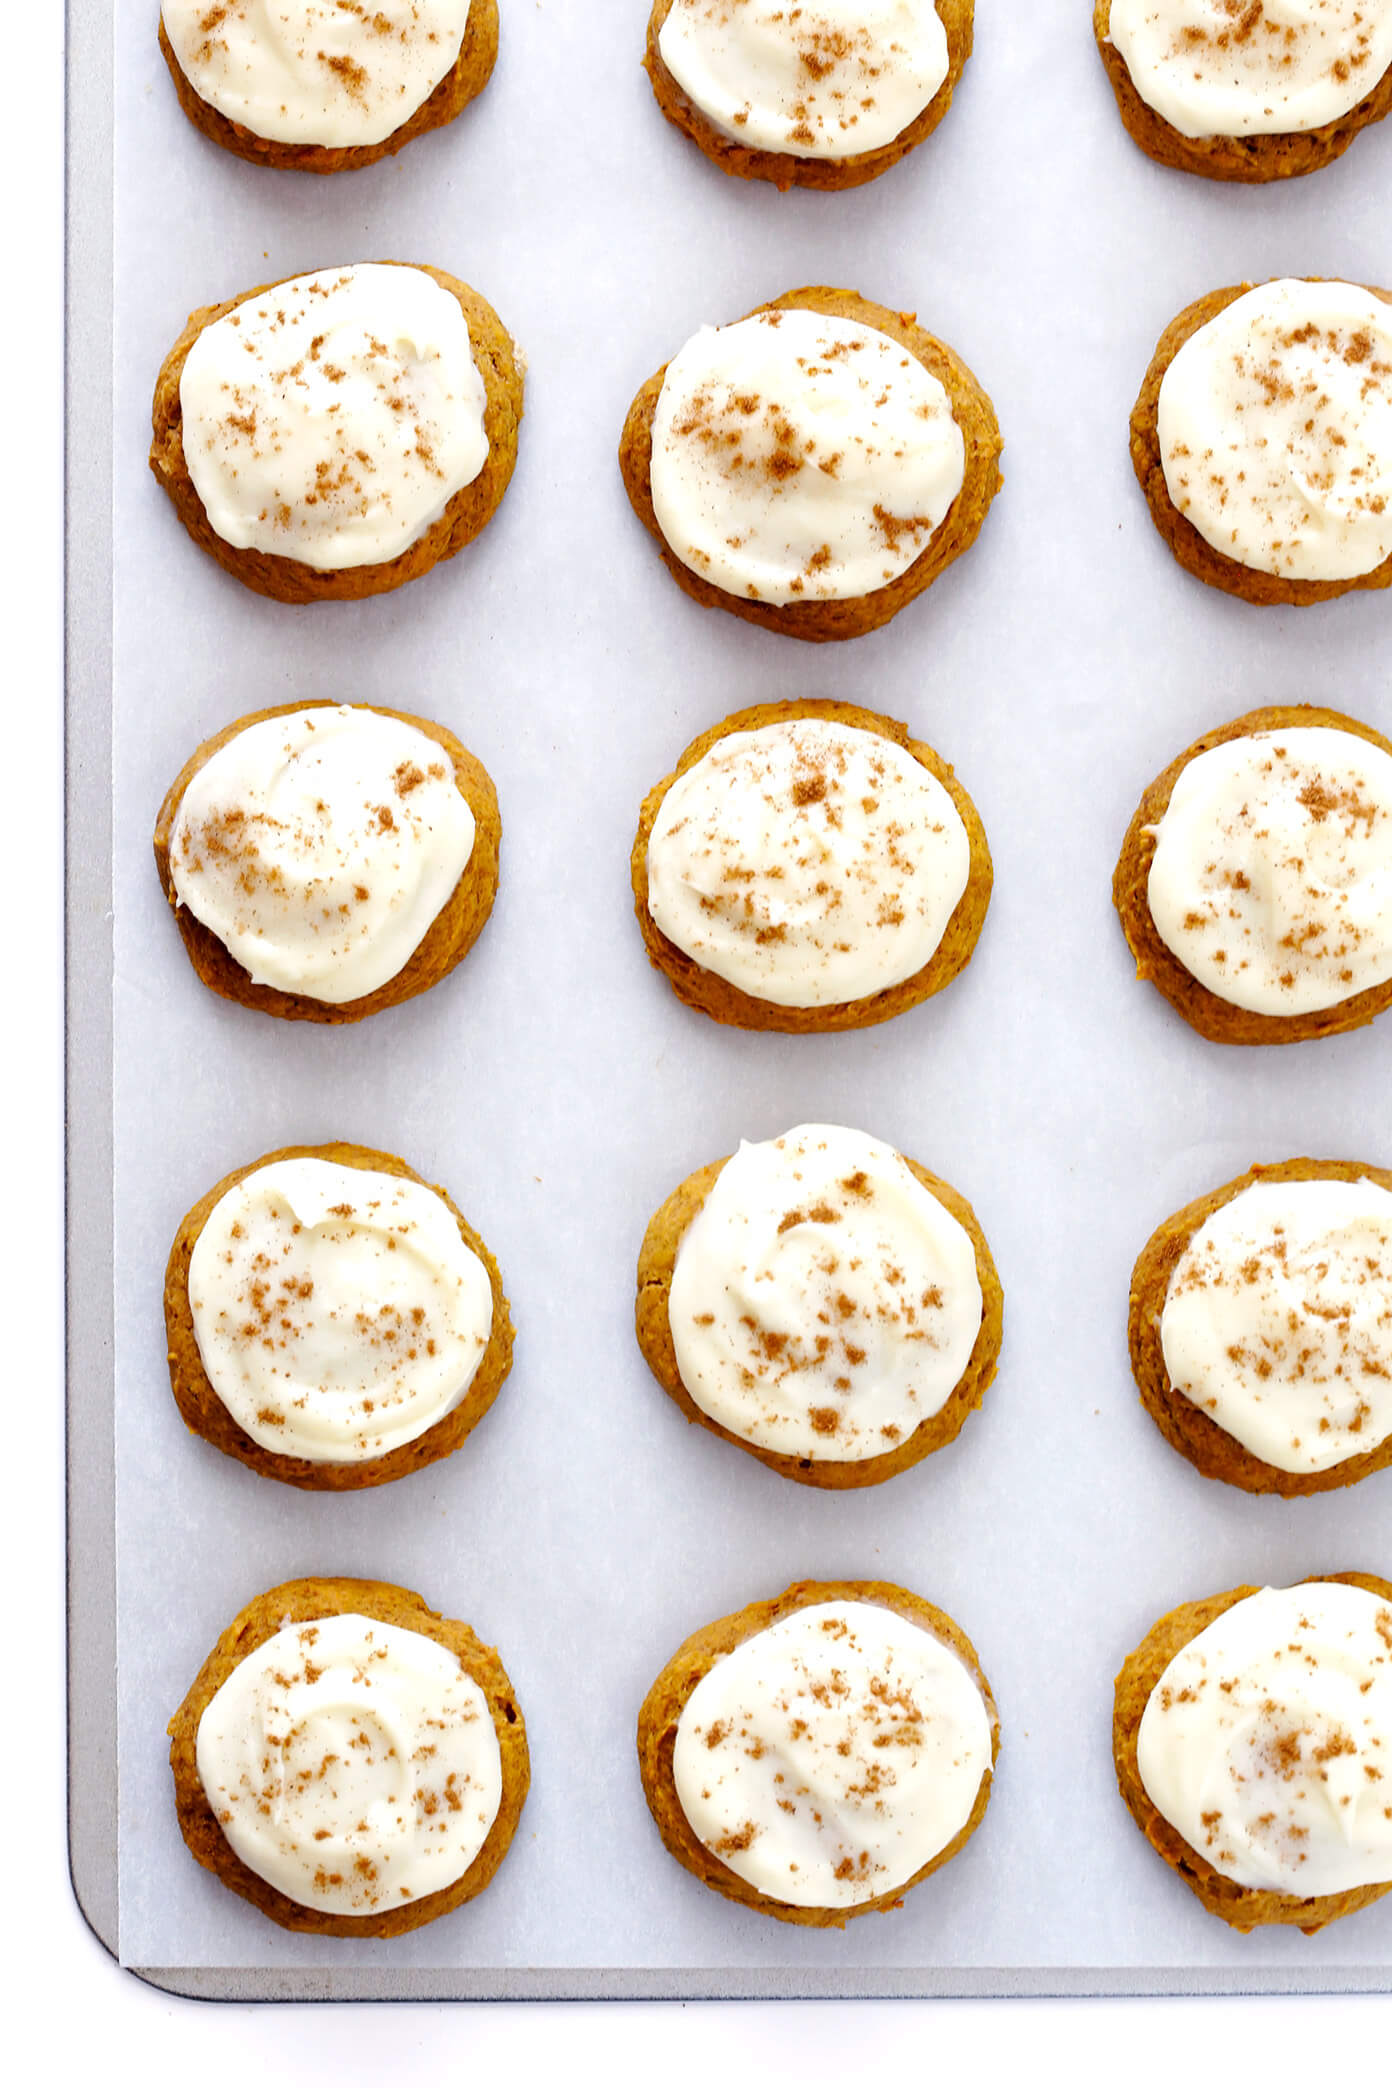 My favorite pumpkin cookie recipe! These soft and delicious pumpkin cookies are iced with a heavenly cream cheese frosting, and are the perfect treat for fall dessert baking. So delicious! | gimmesomeoven.com